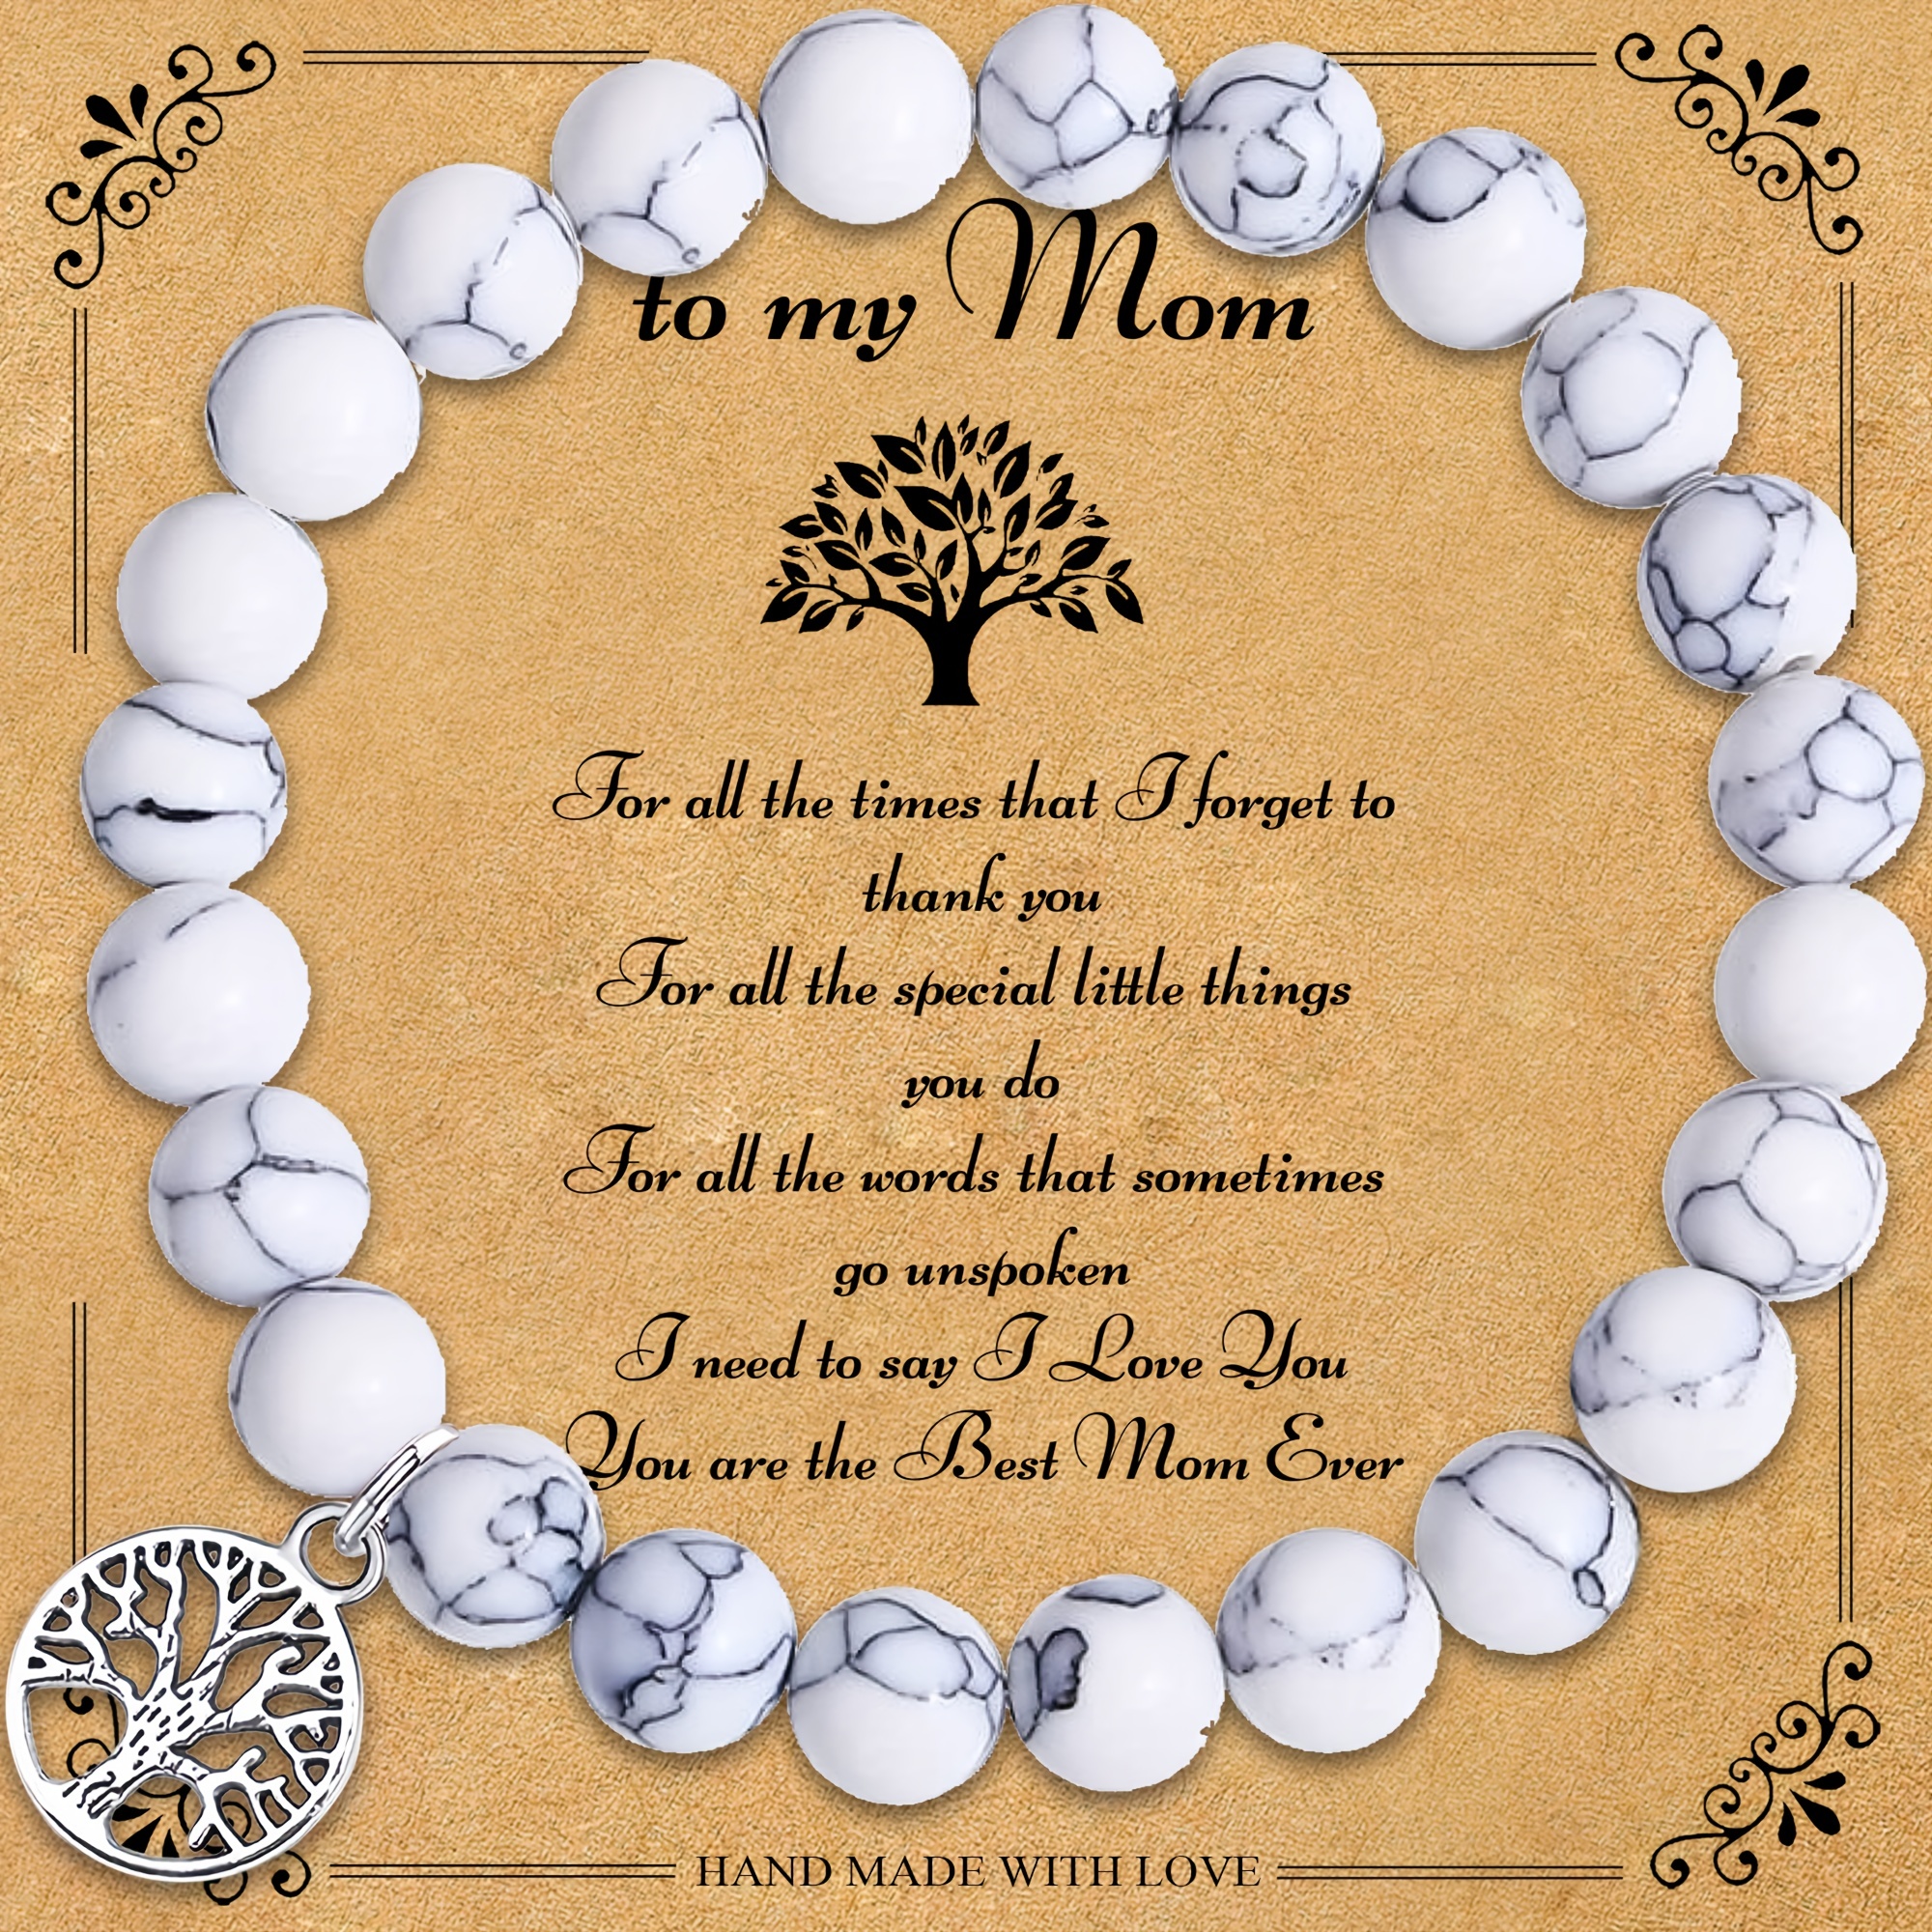 Gifts for Mom from Daughter, Son - Best Mom Ever Gifts Moms Birthday Gift  Ideas